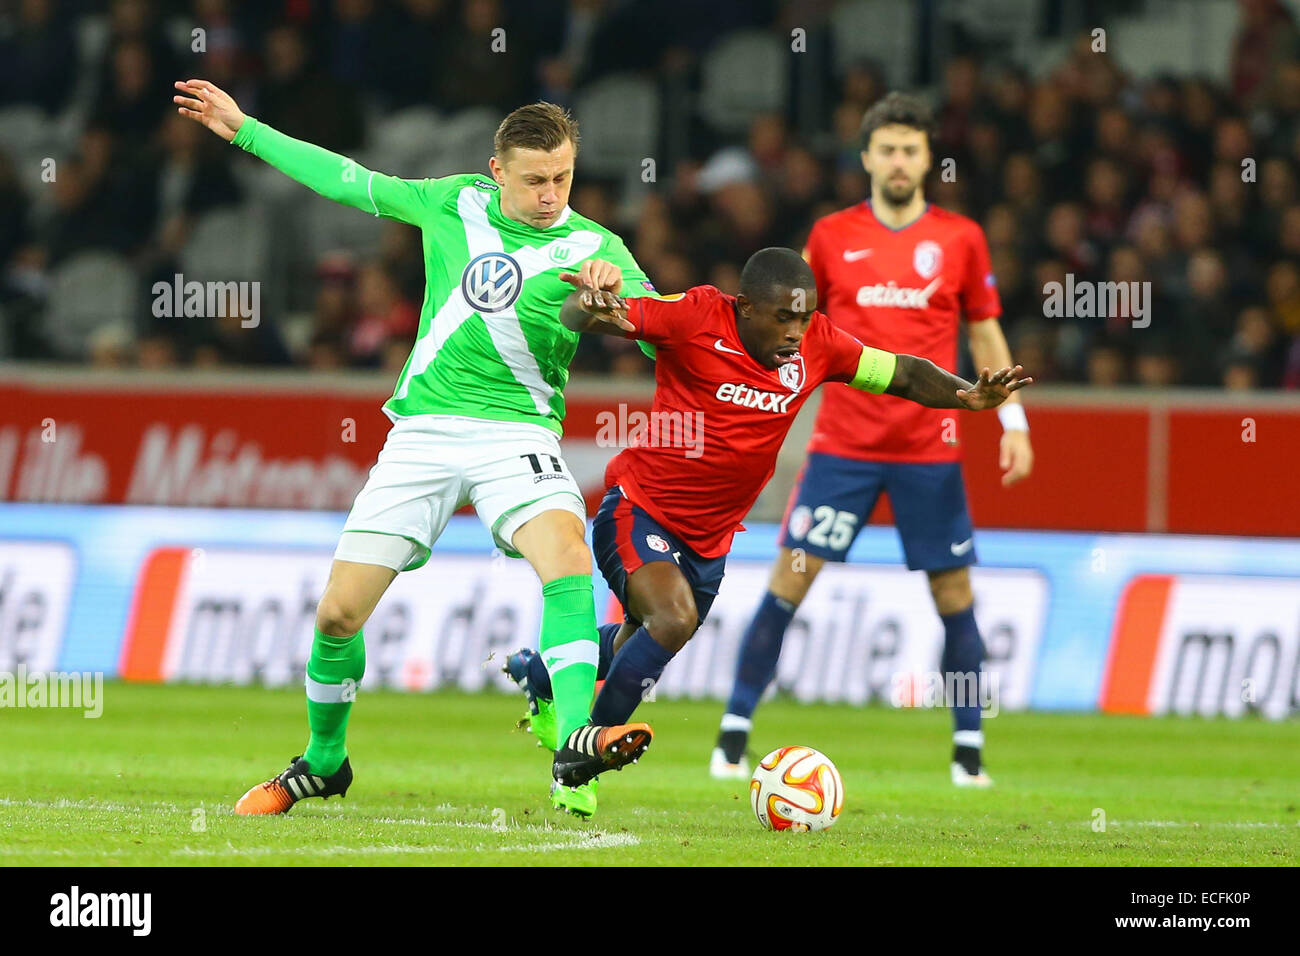 Lillel, France. 11th Dec, 2014. UEFA Europa League group stages. Lille versus Wolfsburg. Ivica Olic (Wolfsburg) and Antonio Rio Mavuba (Lille) © Action Plus Sports/Alamy Live News Stock Photo